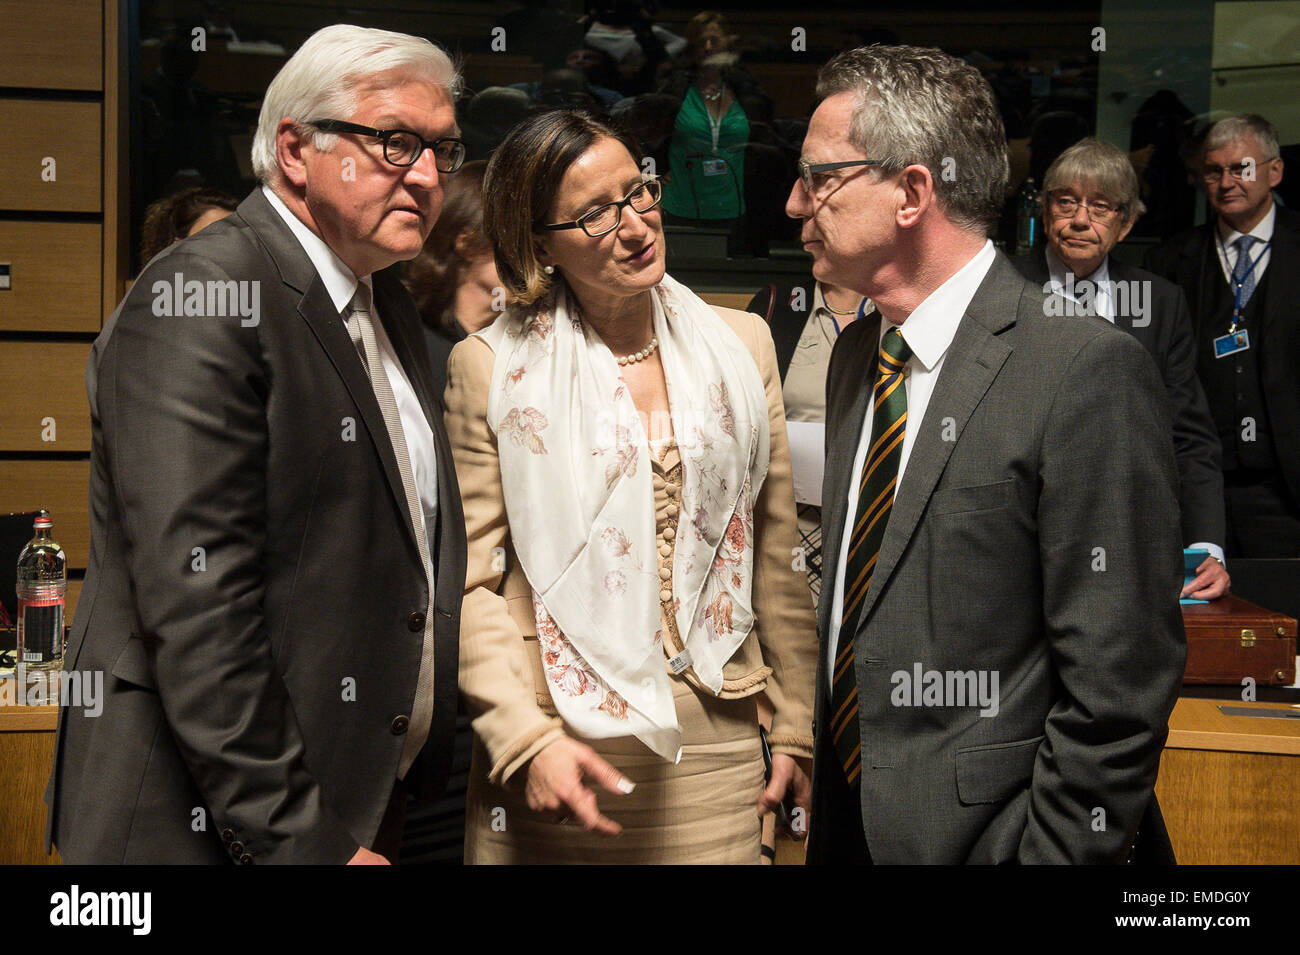 Luxembourg, Lux, Luxembourg. 20th Apr, 2015. (L-R) German Foreign Minister Frank-Walter Steinmeier, Austrian Interior Minister Johanna Mikl-Leitner and German Interior Minister Thomas de Maiziere prior to the EU Foreign Ministers Council (FAC) at European Council headquarters in Luxembourg on 20.04.2015 . The European Union ministers of Foreign Affairs hold urgent talks in a bid to halt the rising death toll of refugees in the Mediterranean Sea. © Wiktor Dabkowski/ZUMA Wire/Alamy Live News Stock Photo